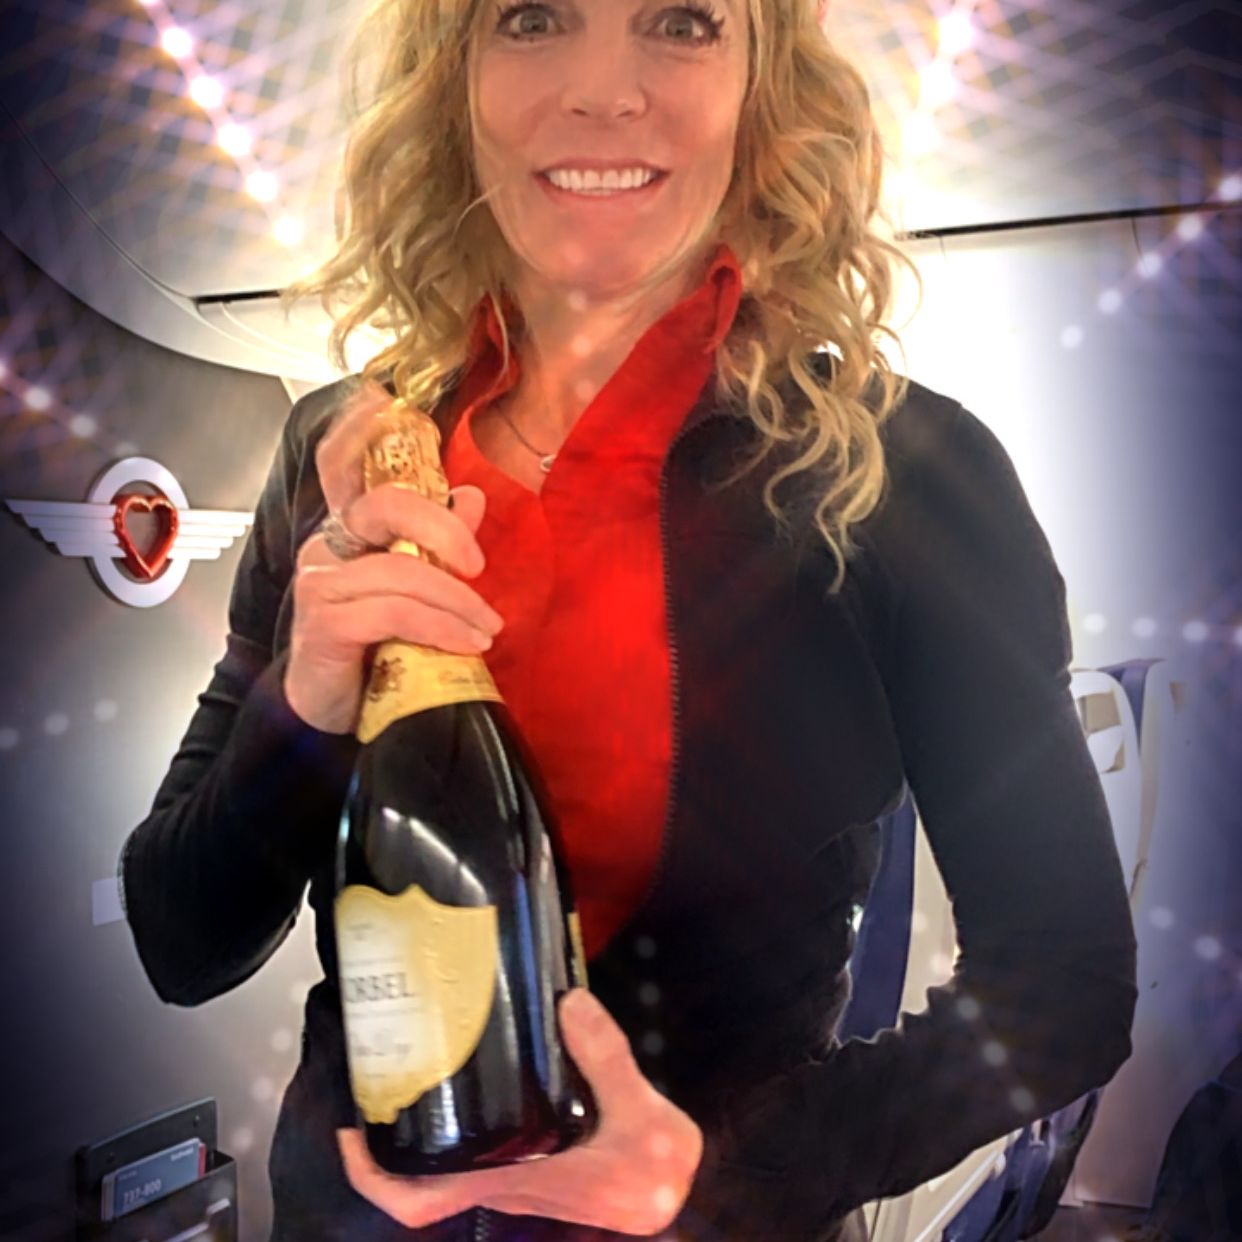 Champagne held by a Flight Attendant